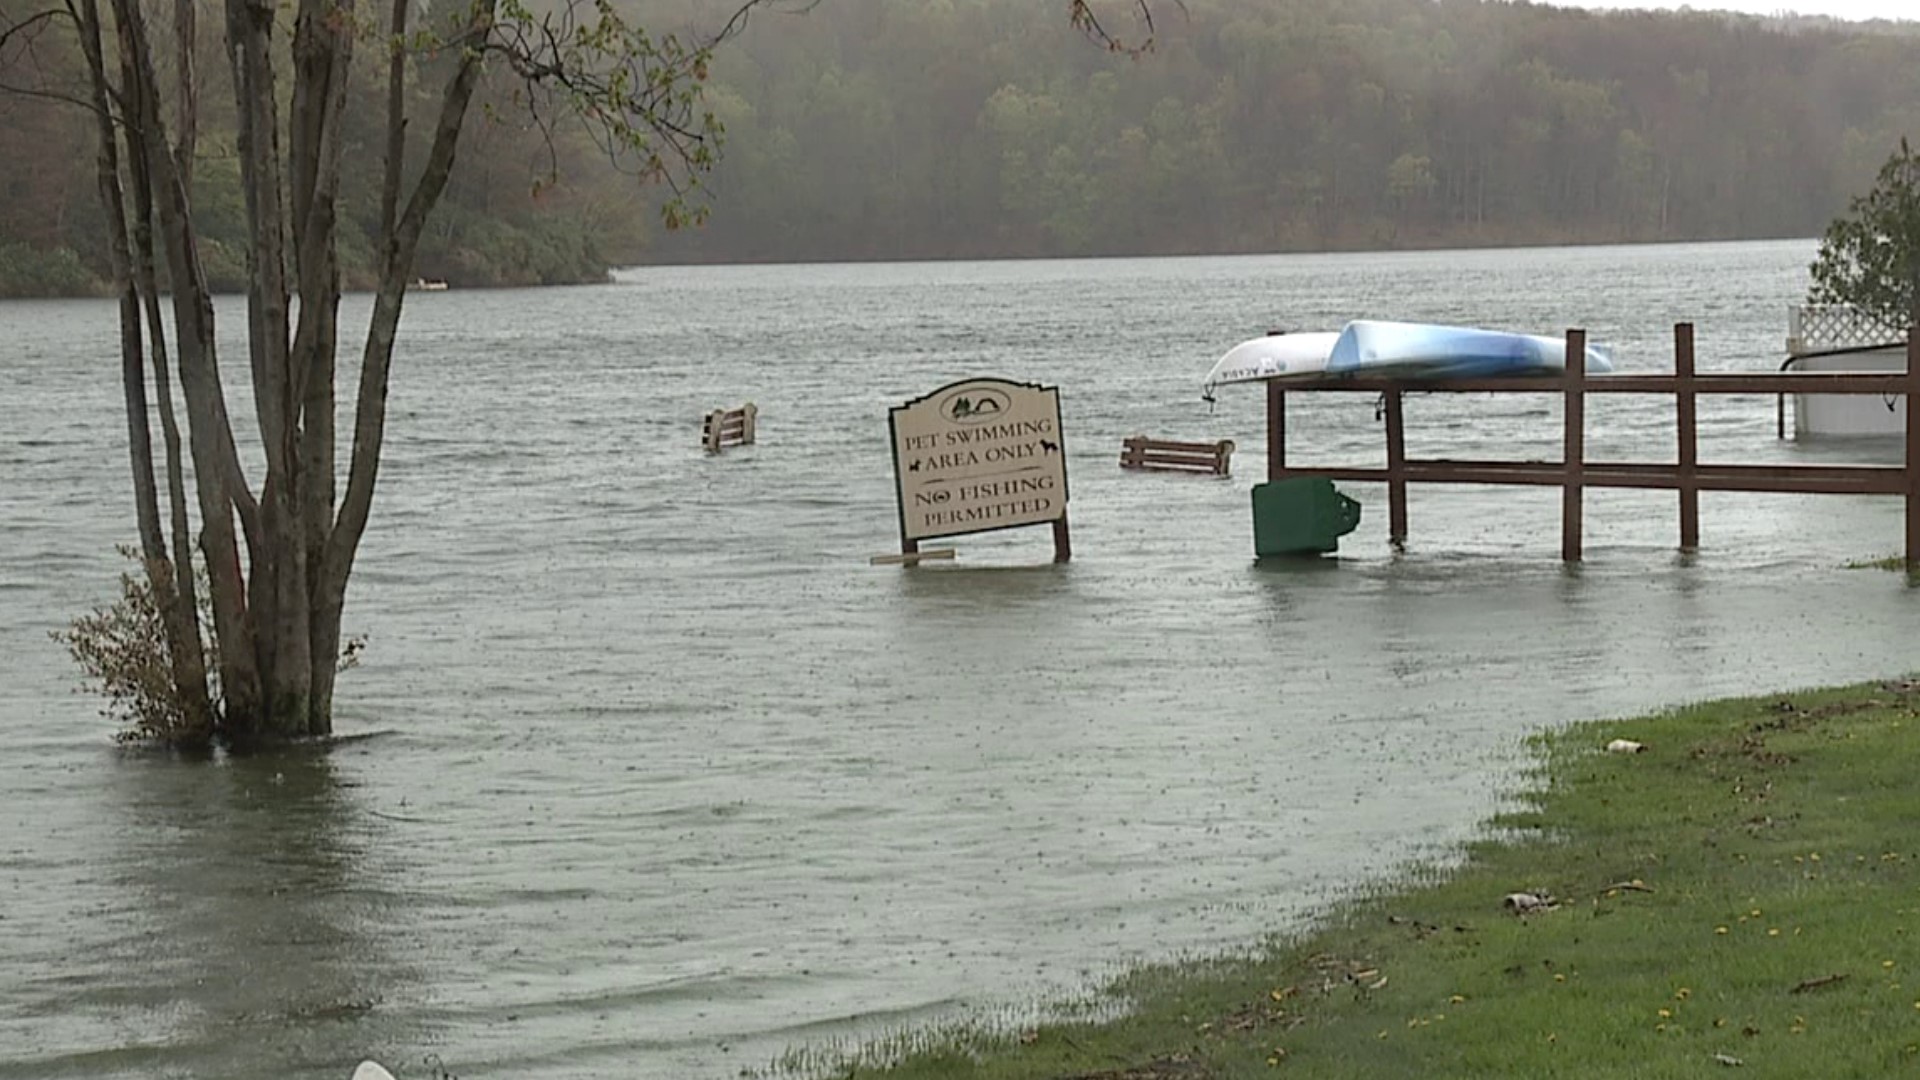 The aftermath of this weekend's heavy rainfall is being felt by one campsite that now sees much of its shorelines and community spaces underwater.